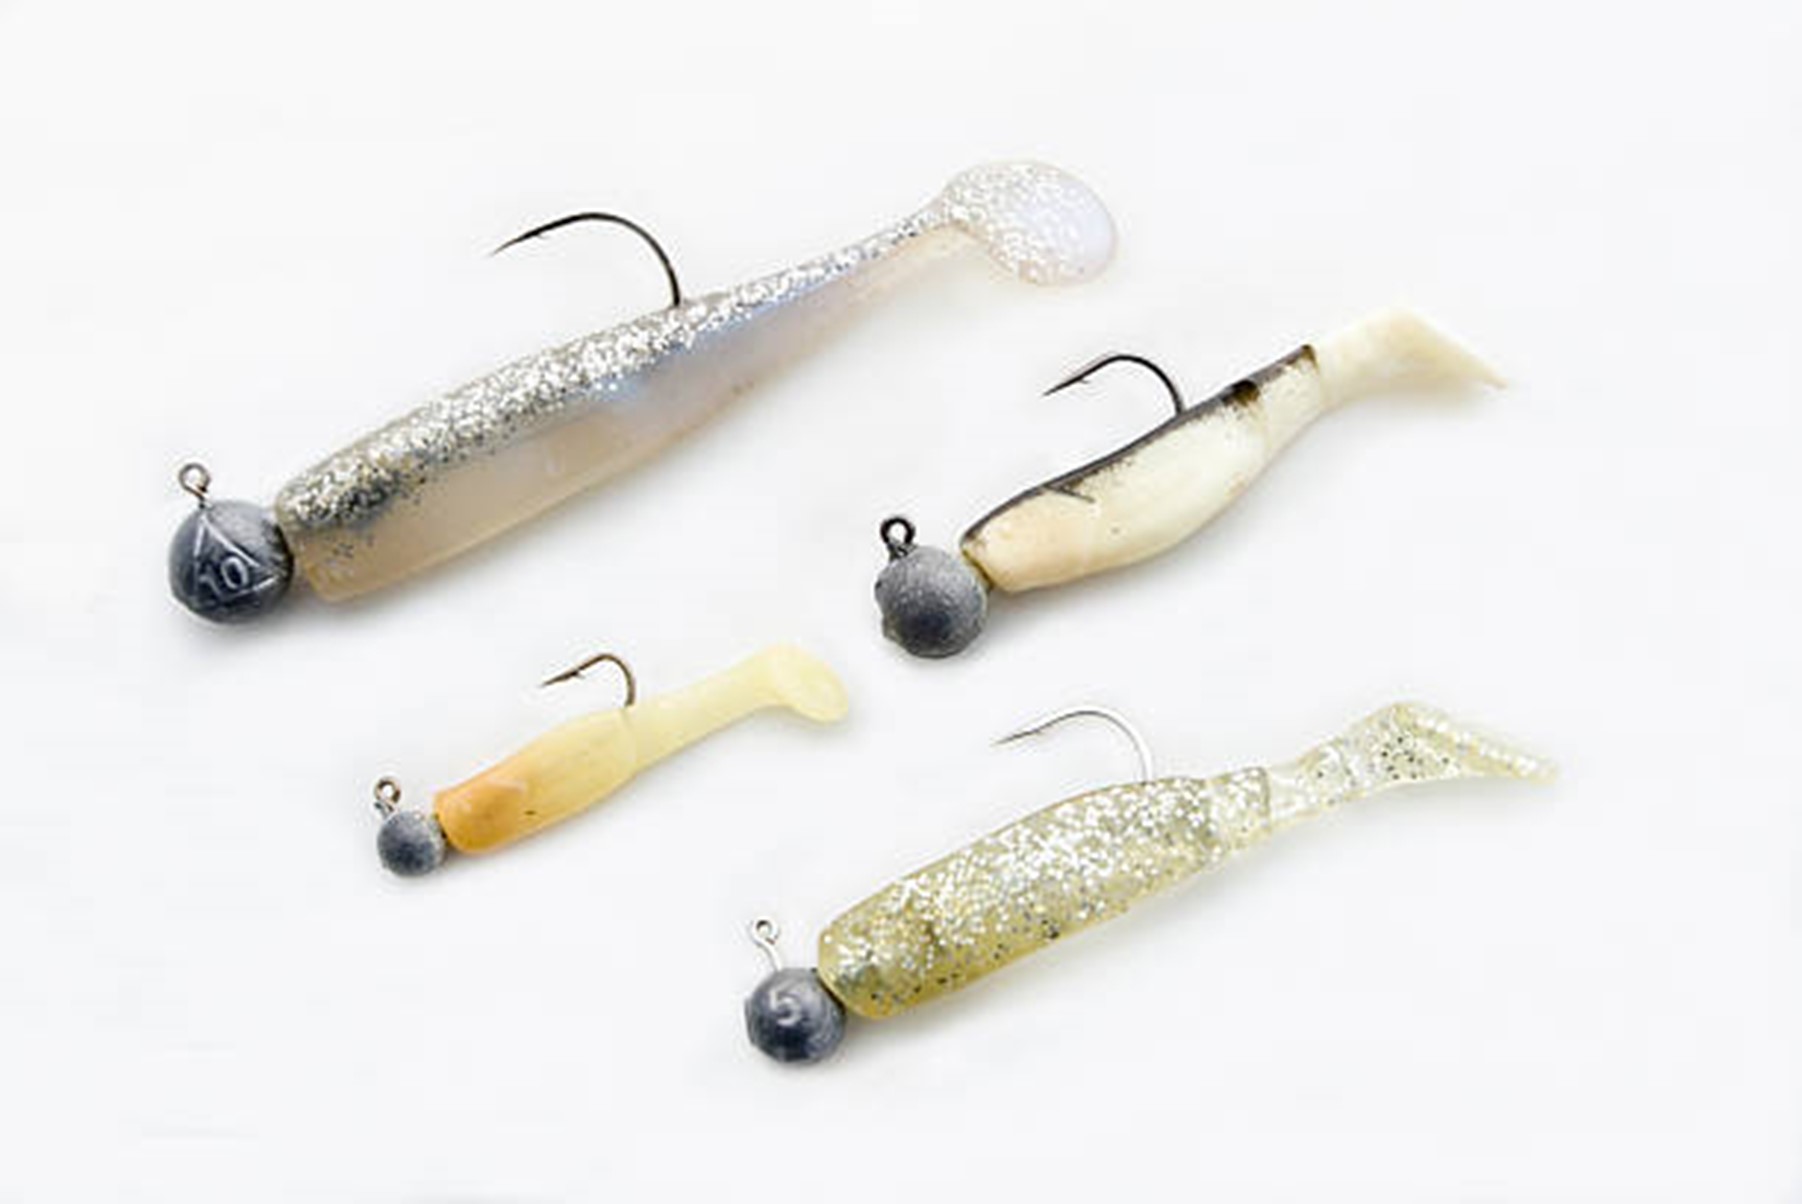 How To Properly Set Your Hook When Using Soft Plastics [VIDEO]